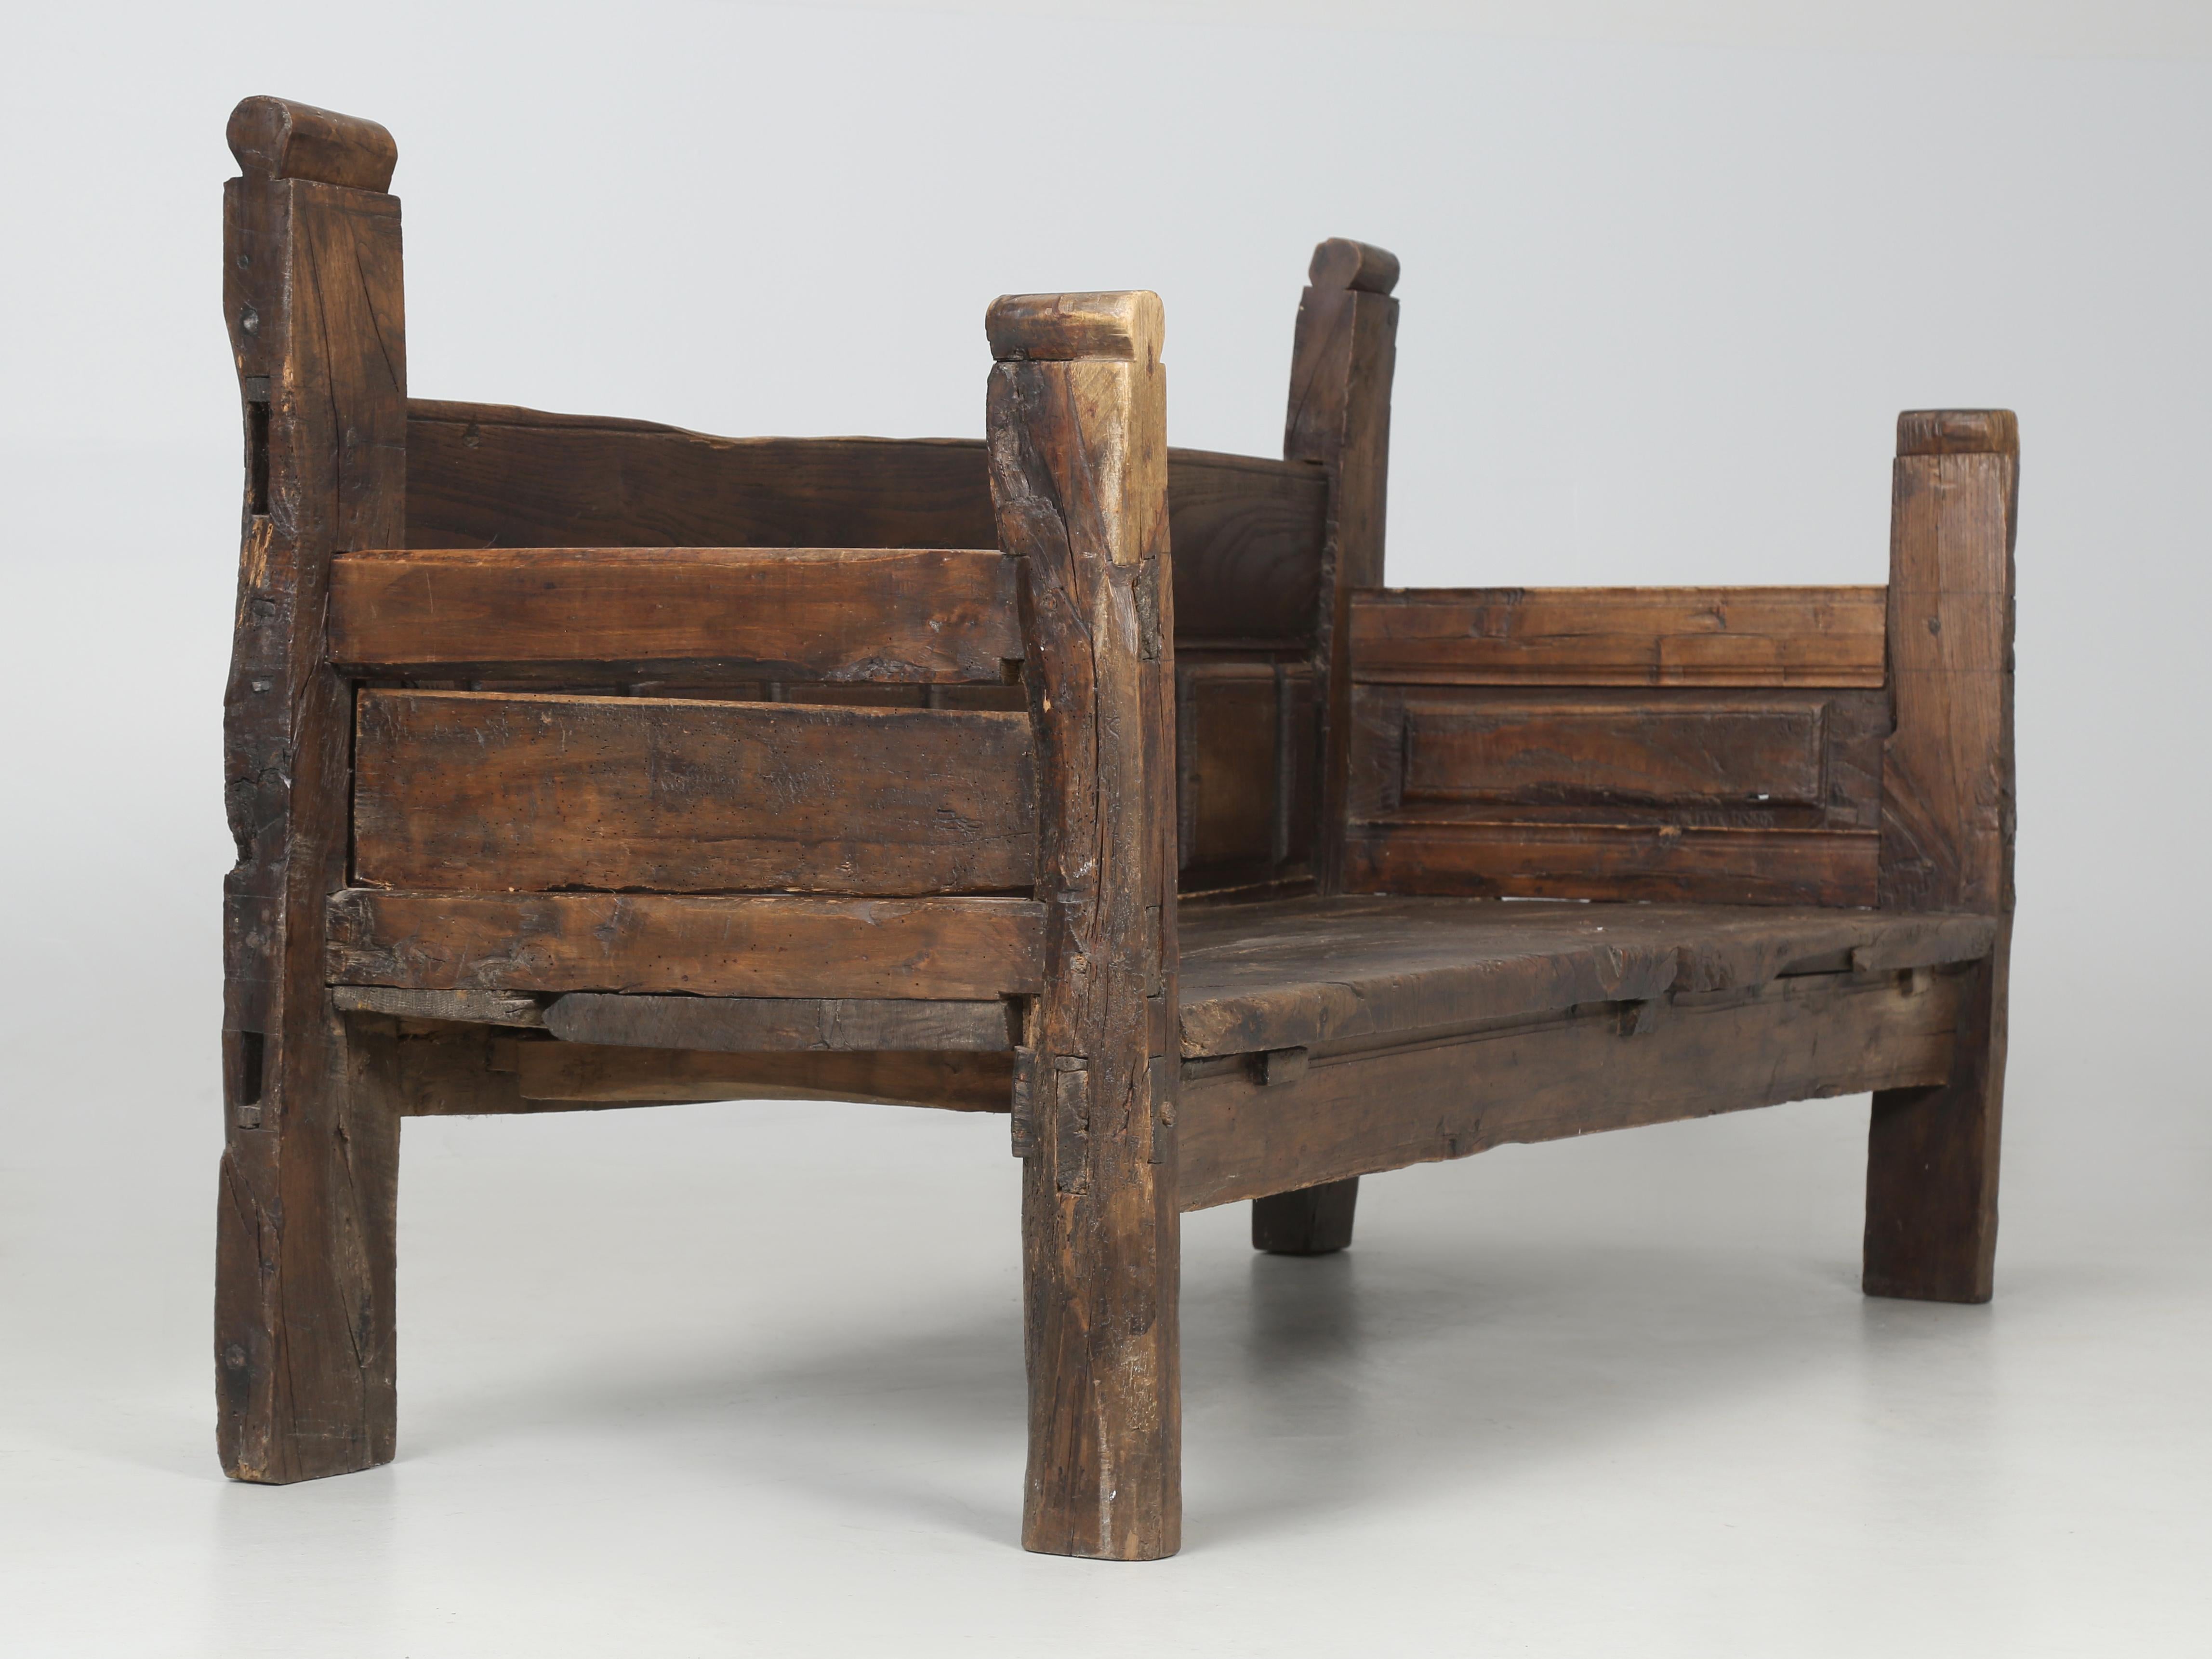 Central Asian Antique Primitive Asian Bench, Unrestored, Amazing Wood Seat by Mother Nature